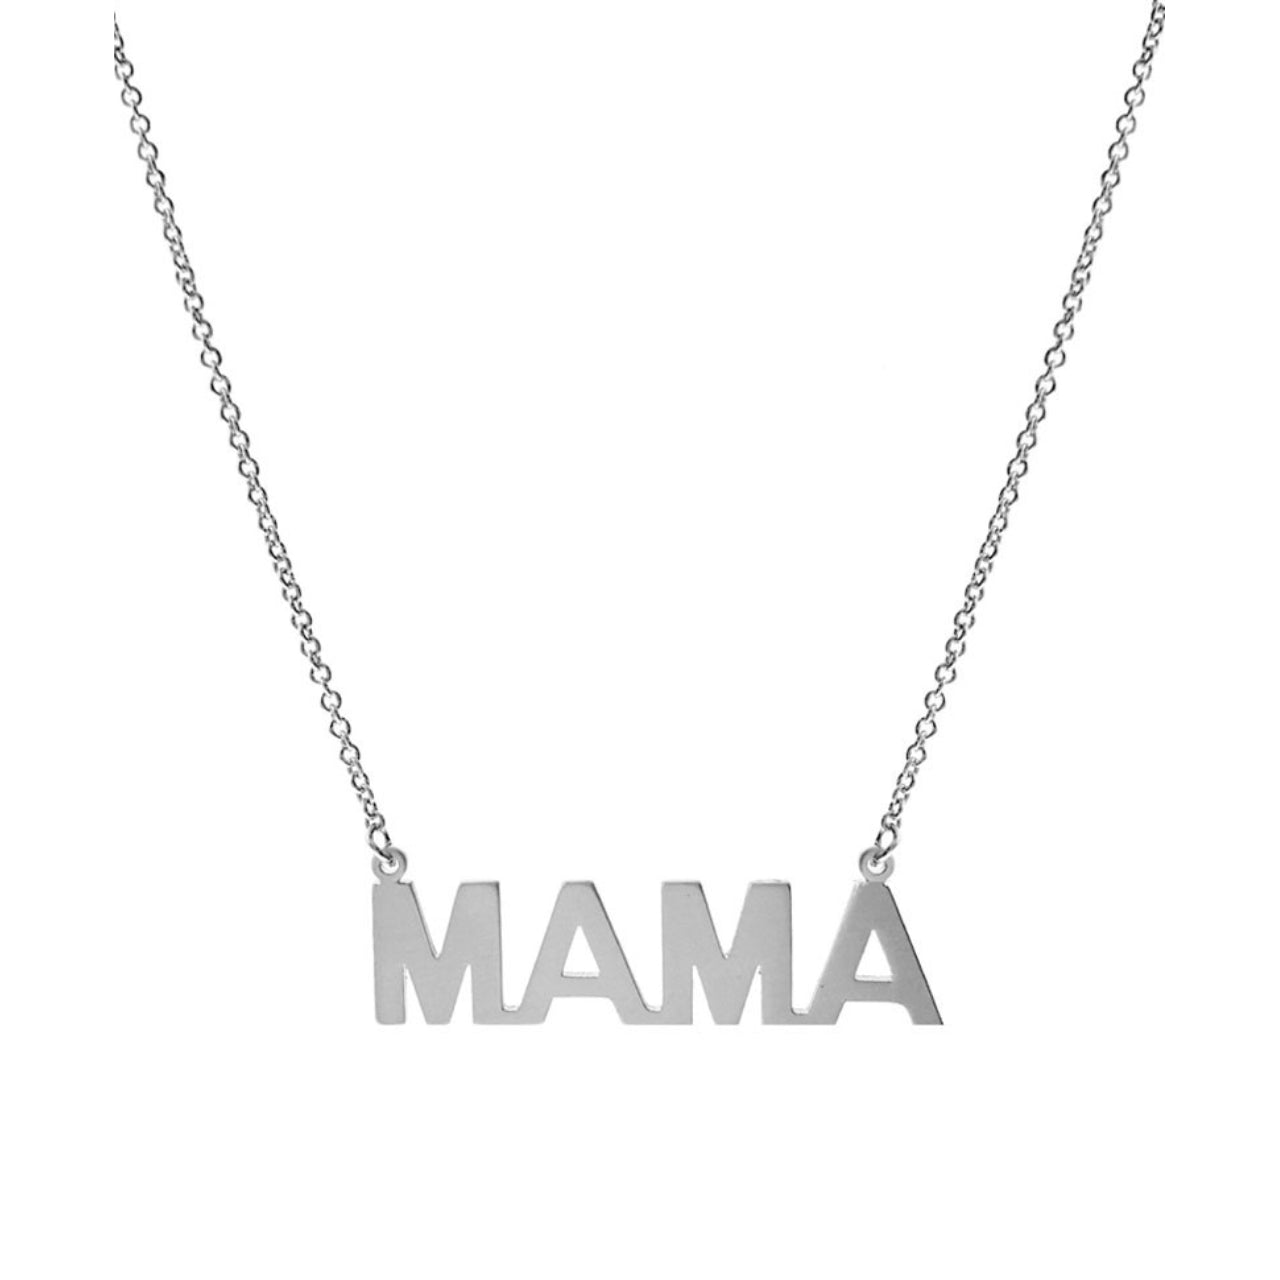 MAMA Necklace - The Graphic Tee